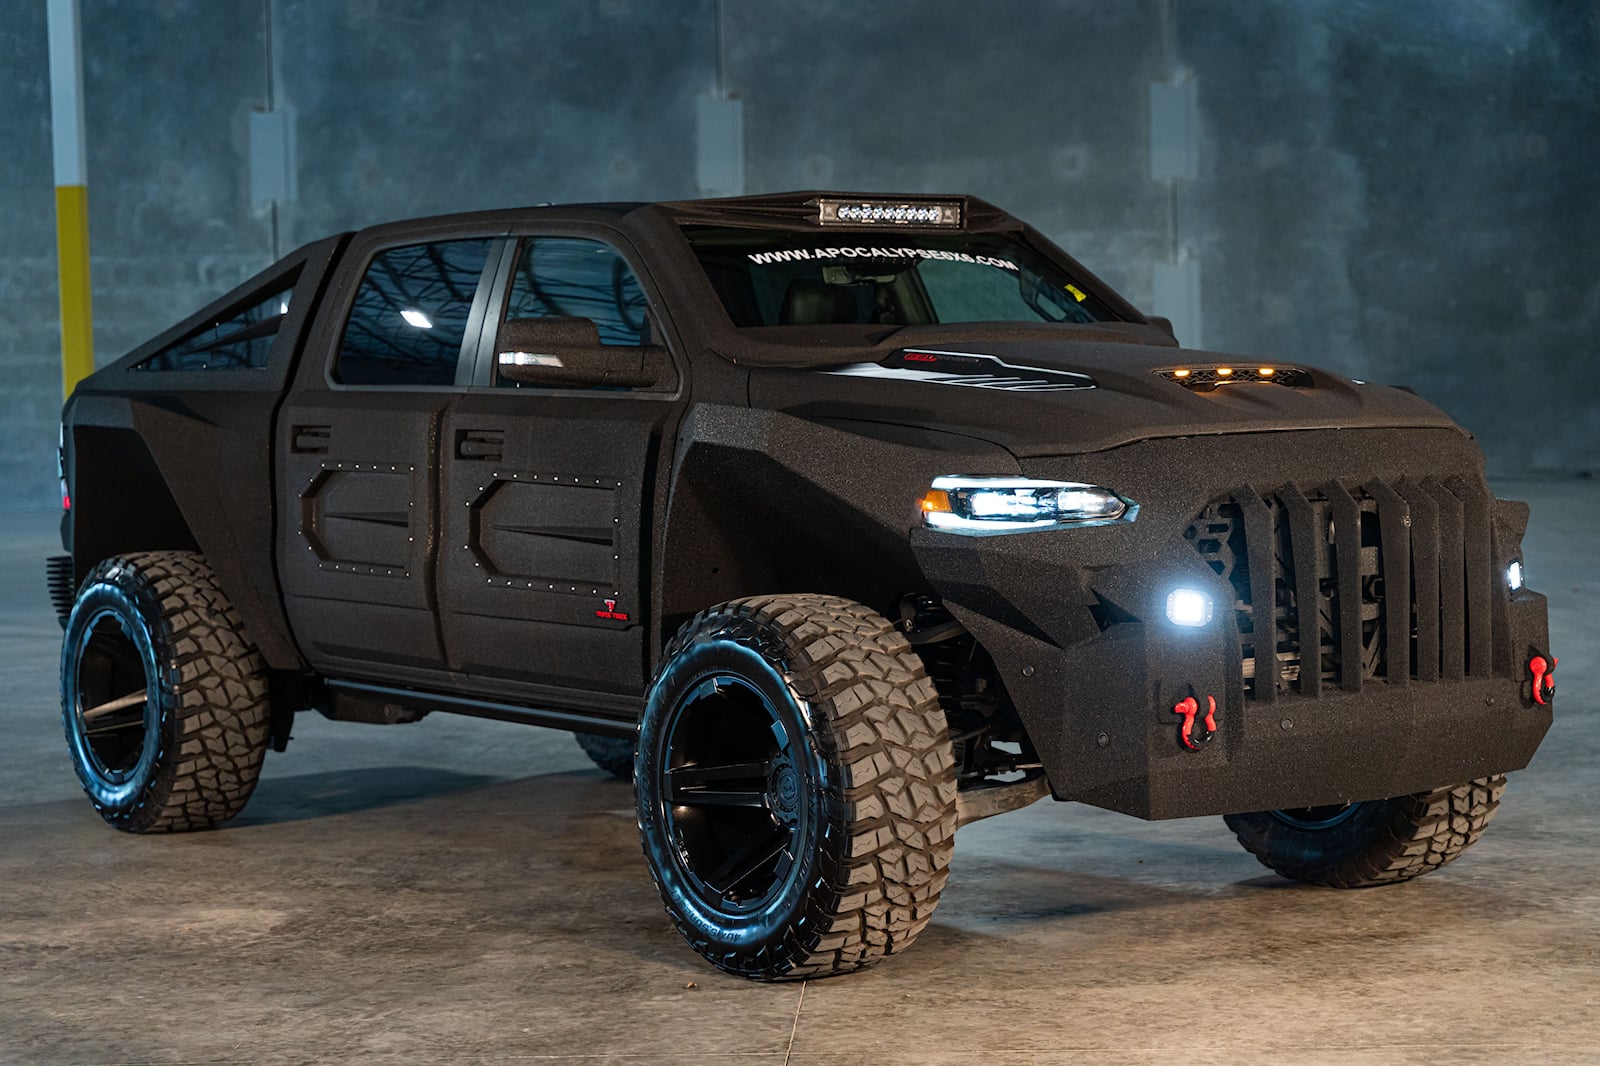 Apocalypse Super Truck 4x4 Is A Ram 1500 On Steroids